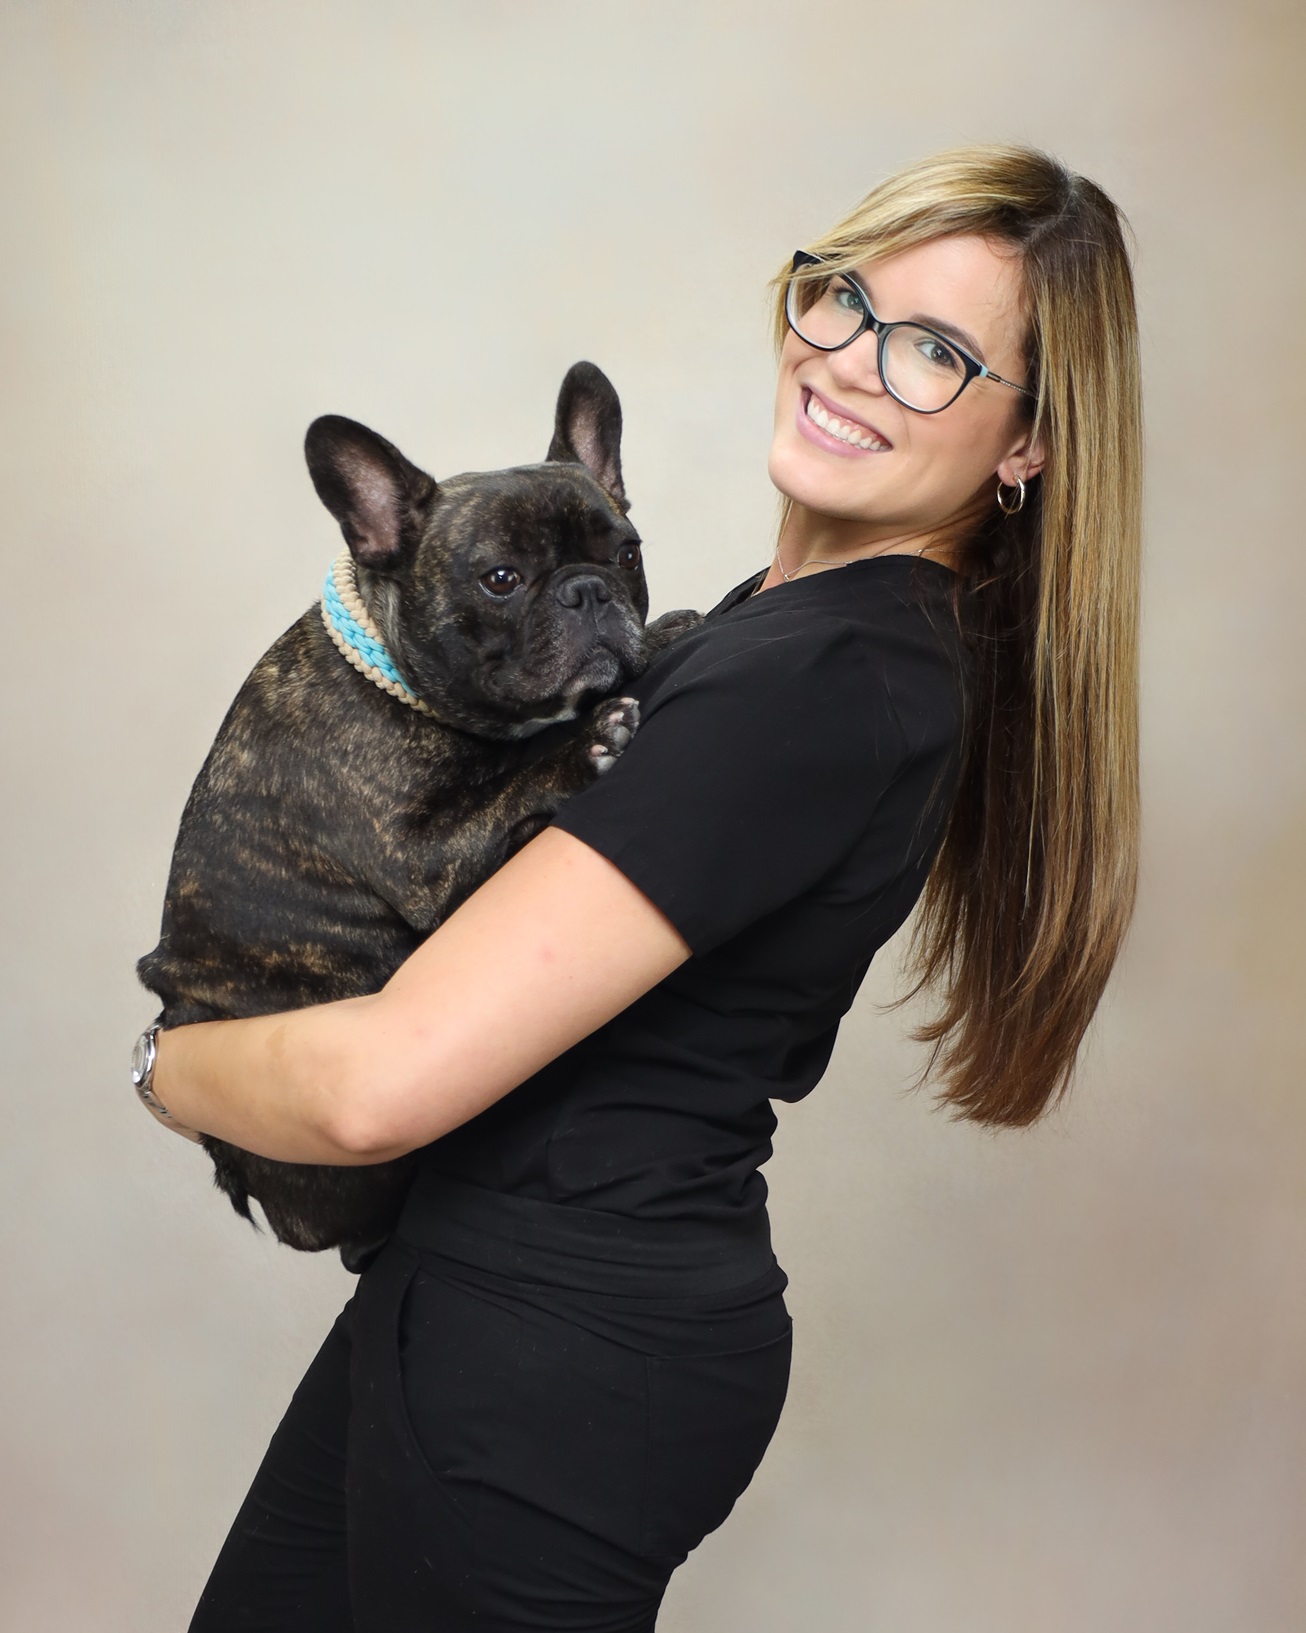 Dr. Arroyo-Julia poses with her dog